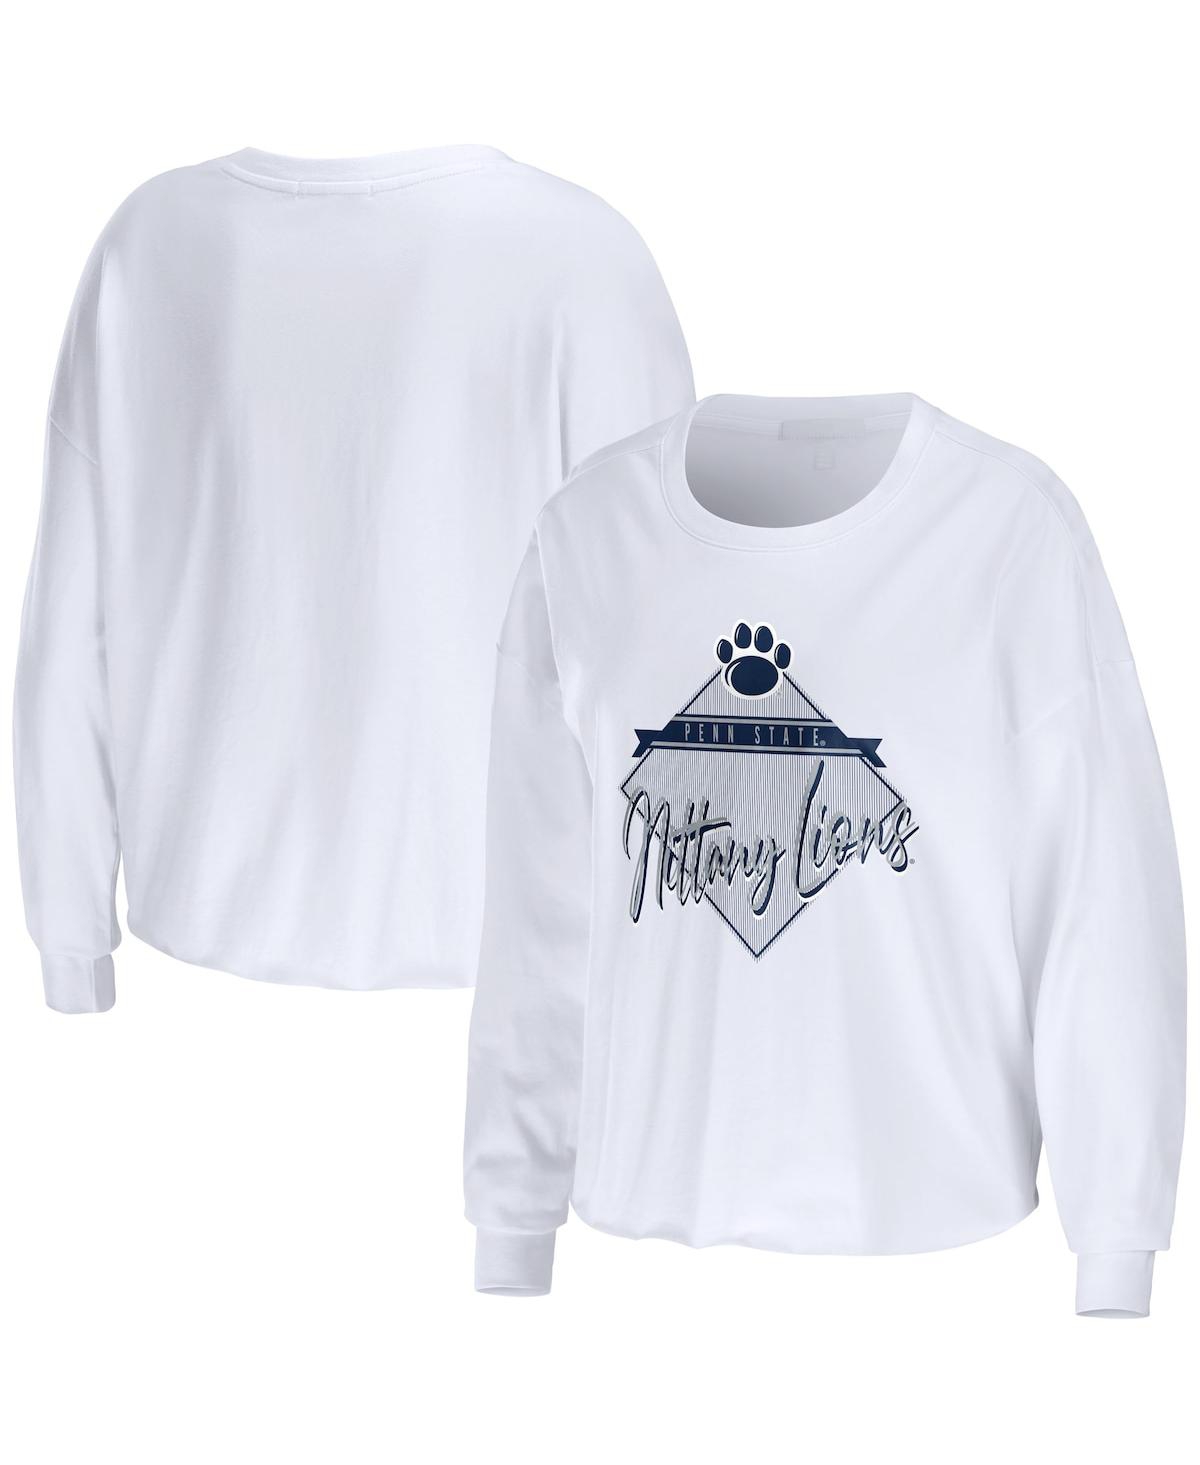 Women's Wear by Erin Andrews White Penn State Nittany Lions Diamond Long Sleeve Cropped T-shirt - White